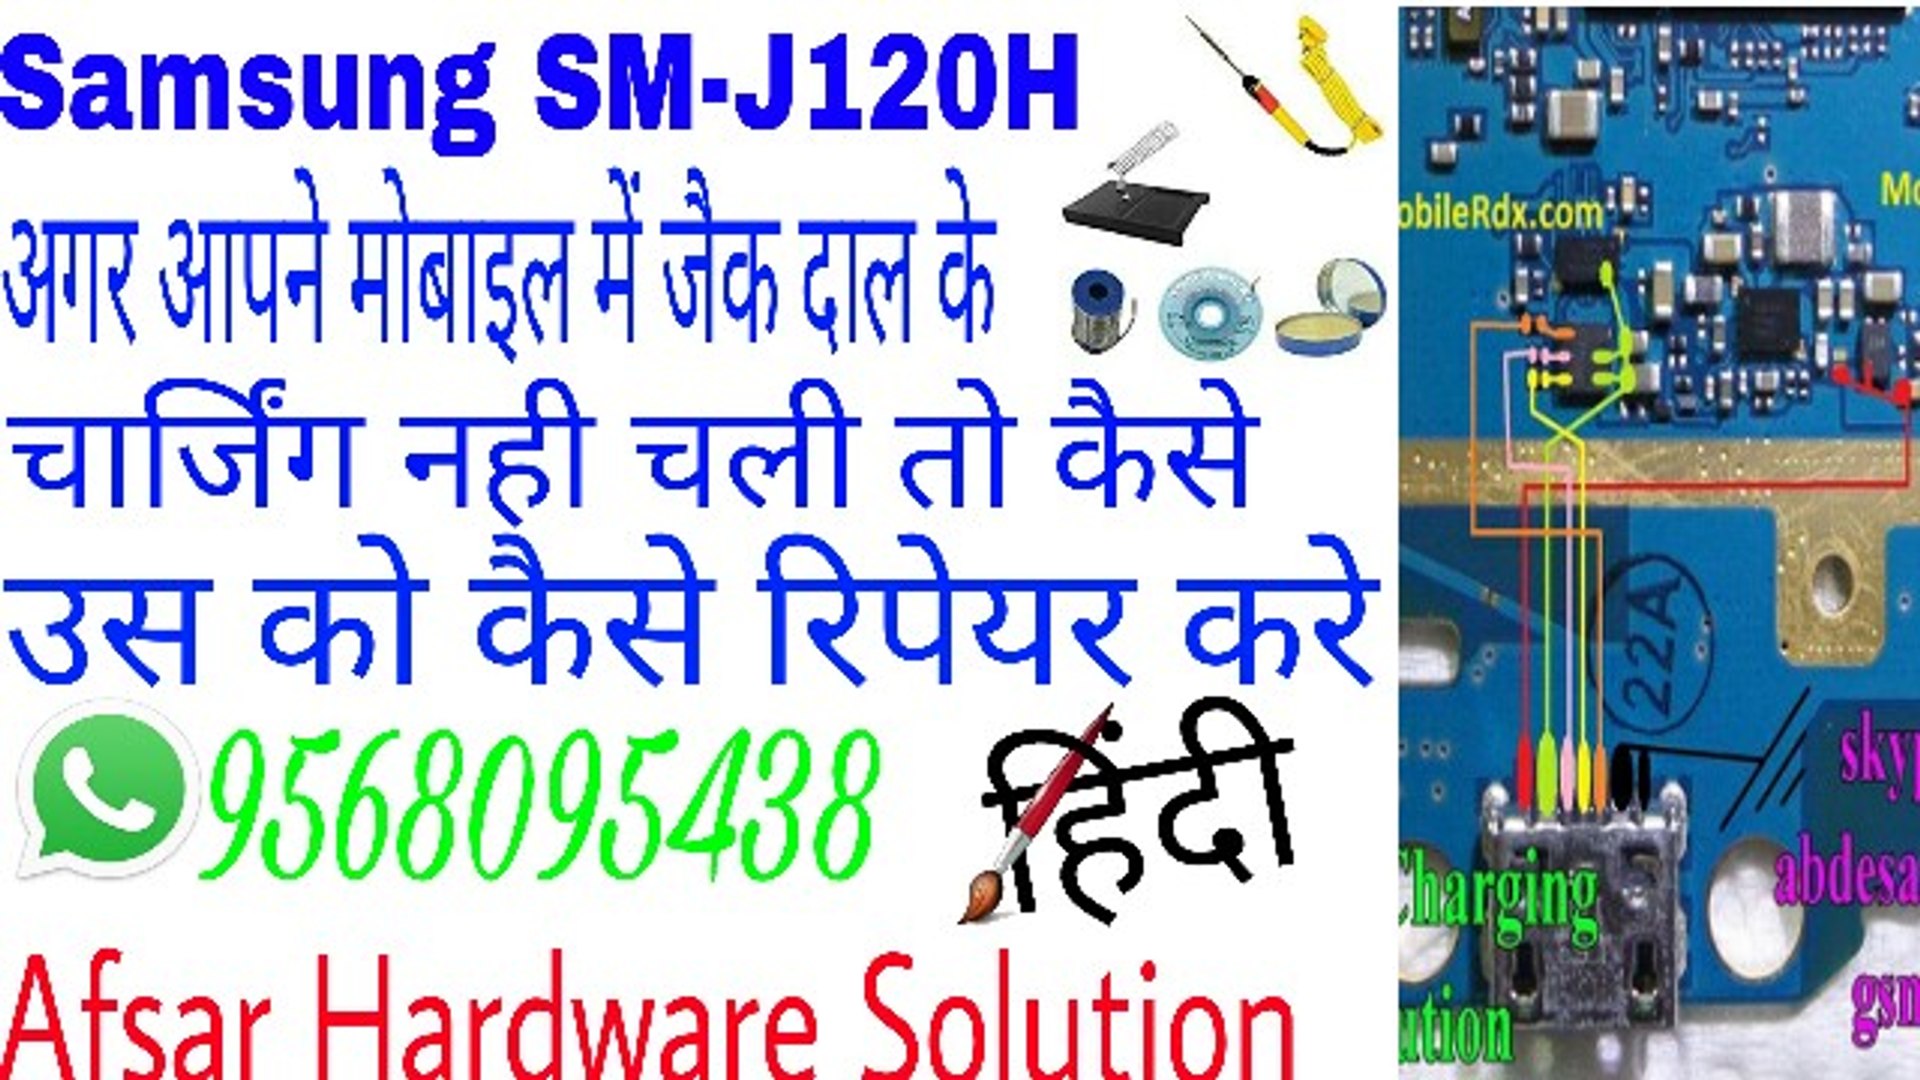 Samsung SM-J120H Not Charging Problem Solution Usb Ways - video Dailymotion